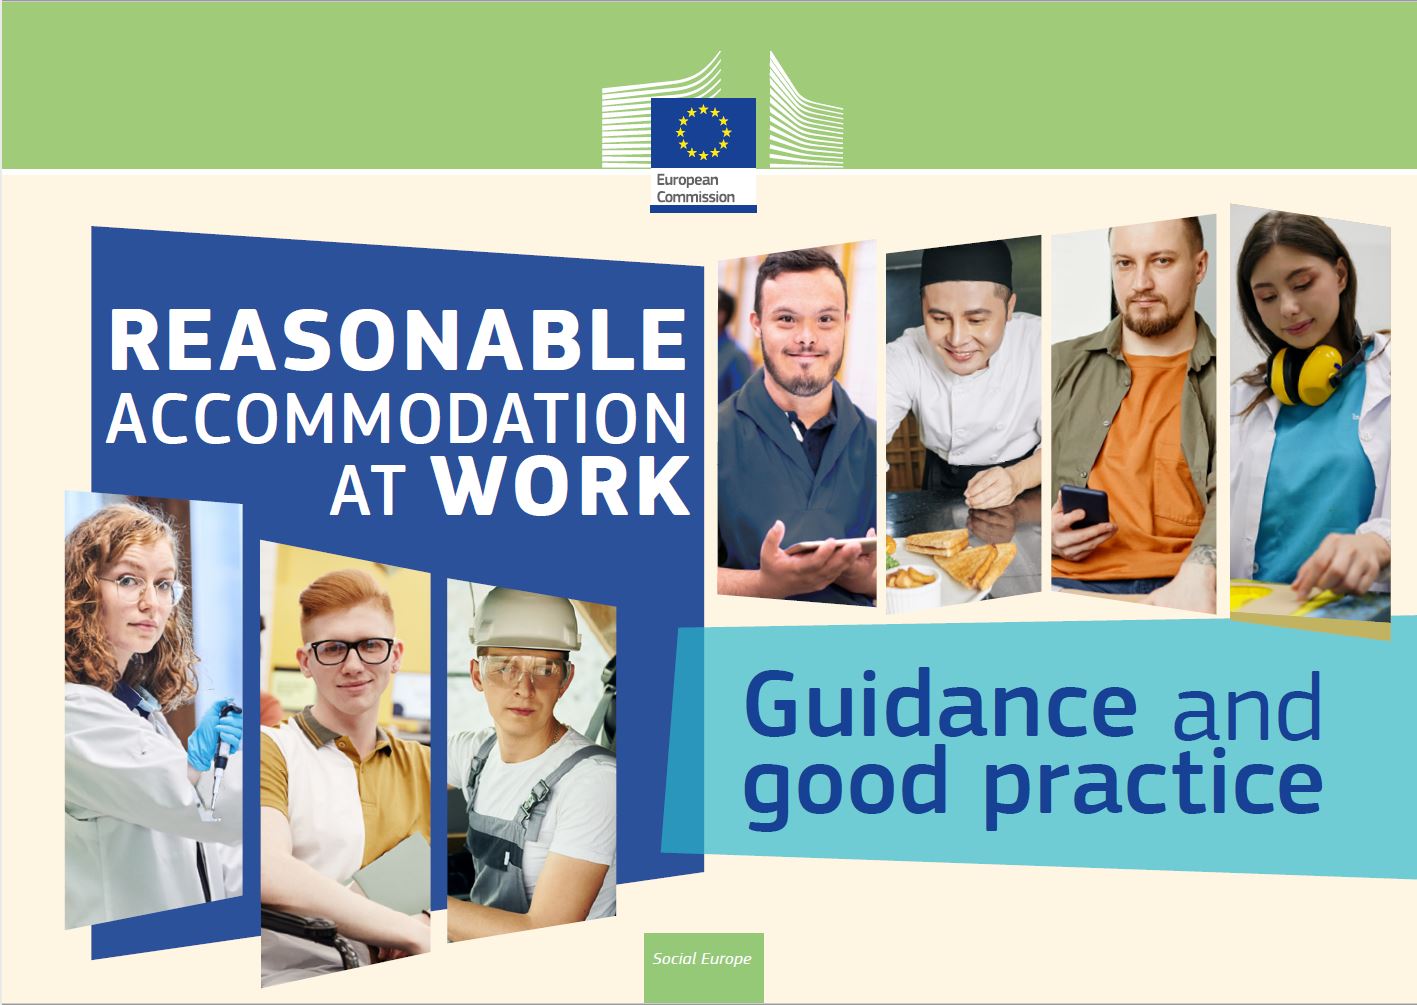 Reasonable accommodation at work -
Guidelines and good practices